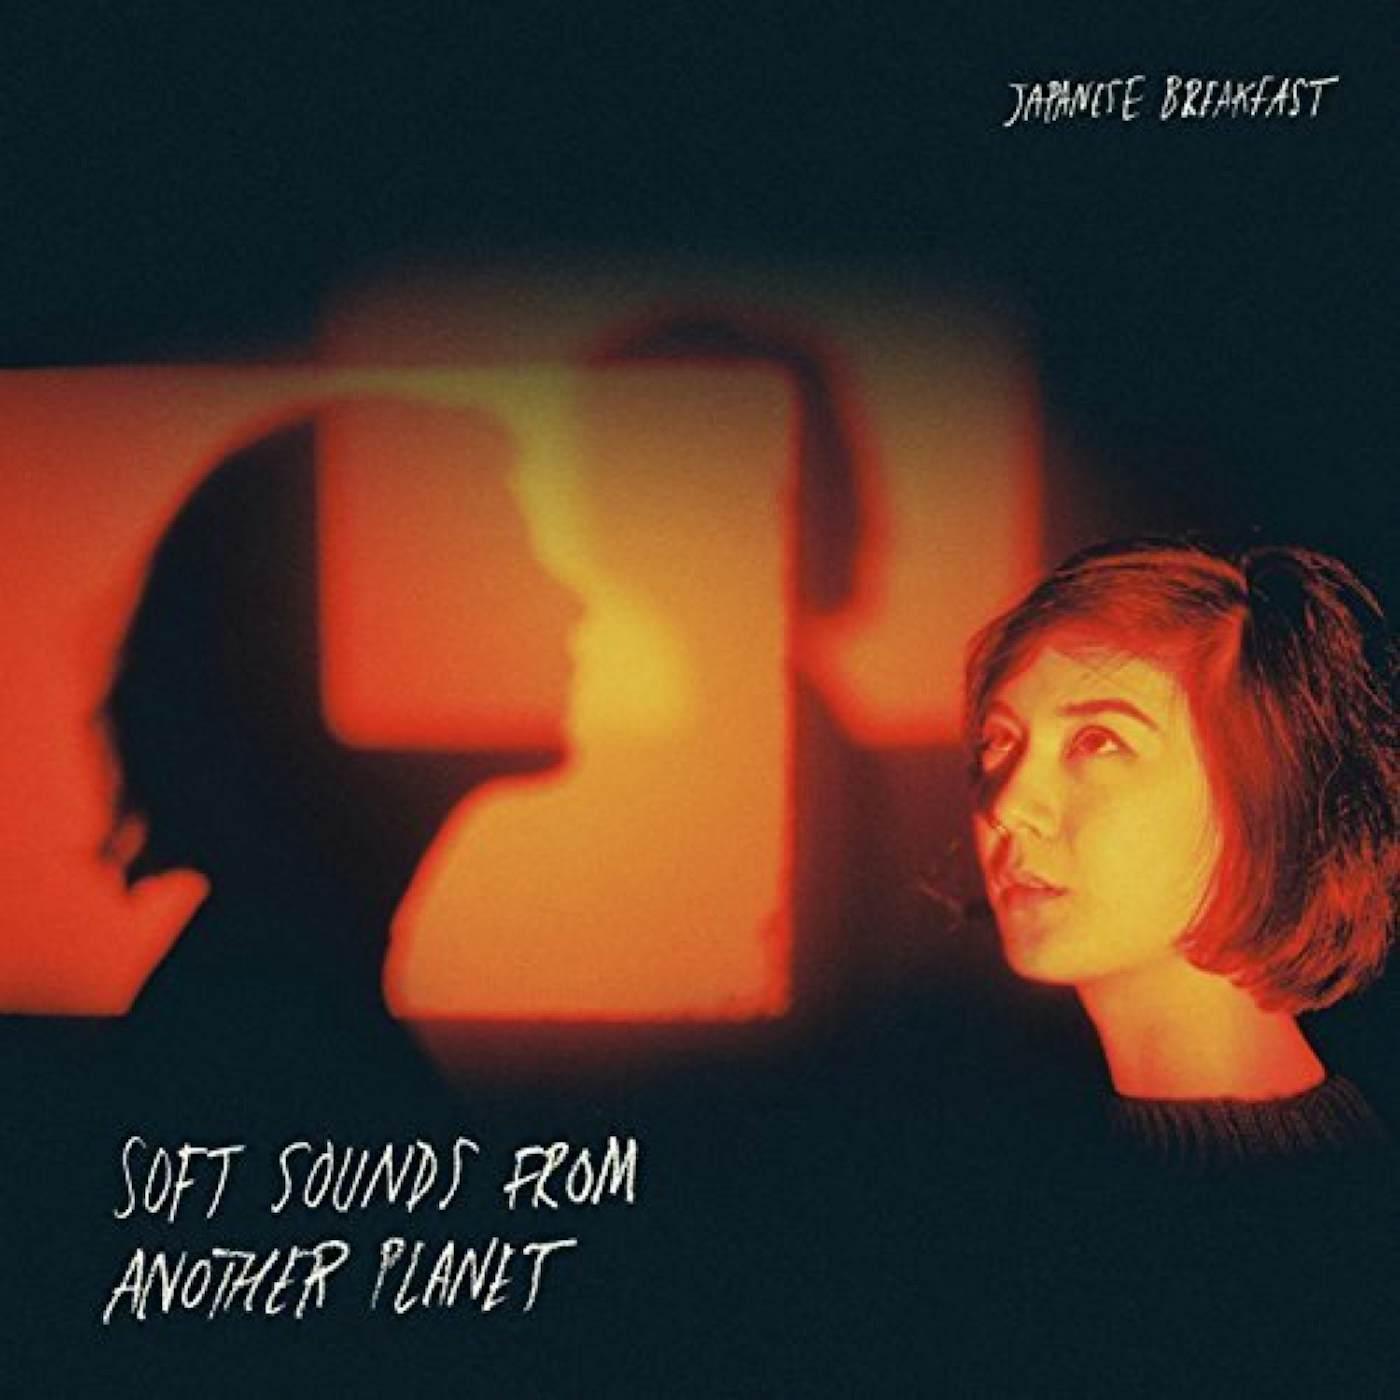 Japanese Breakfast SOFT SOUNDS FROM ANOTHER PLANET CD